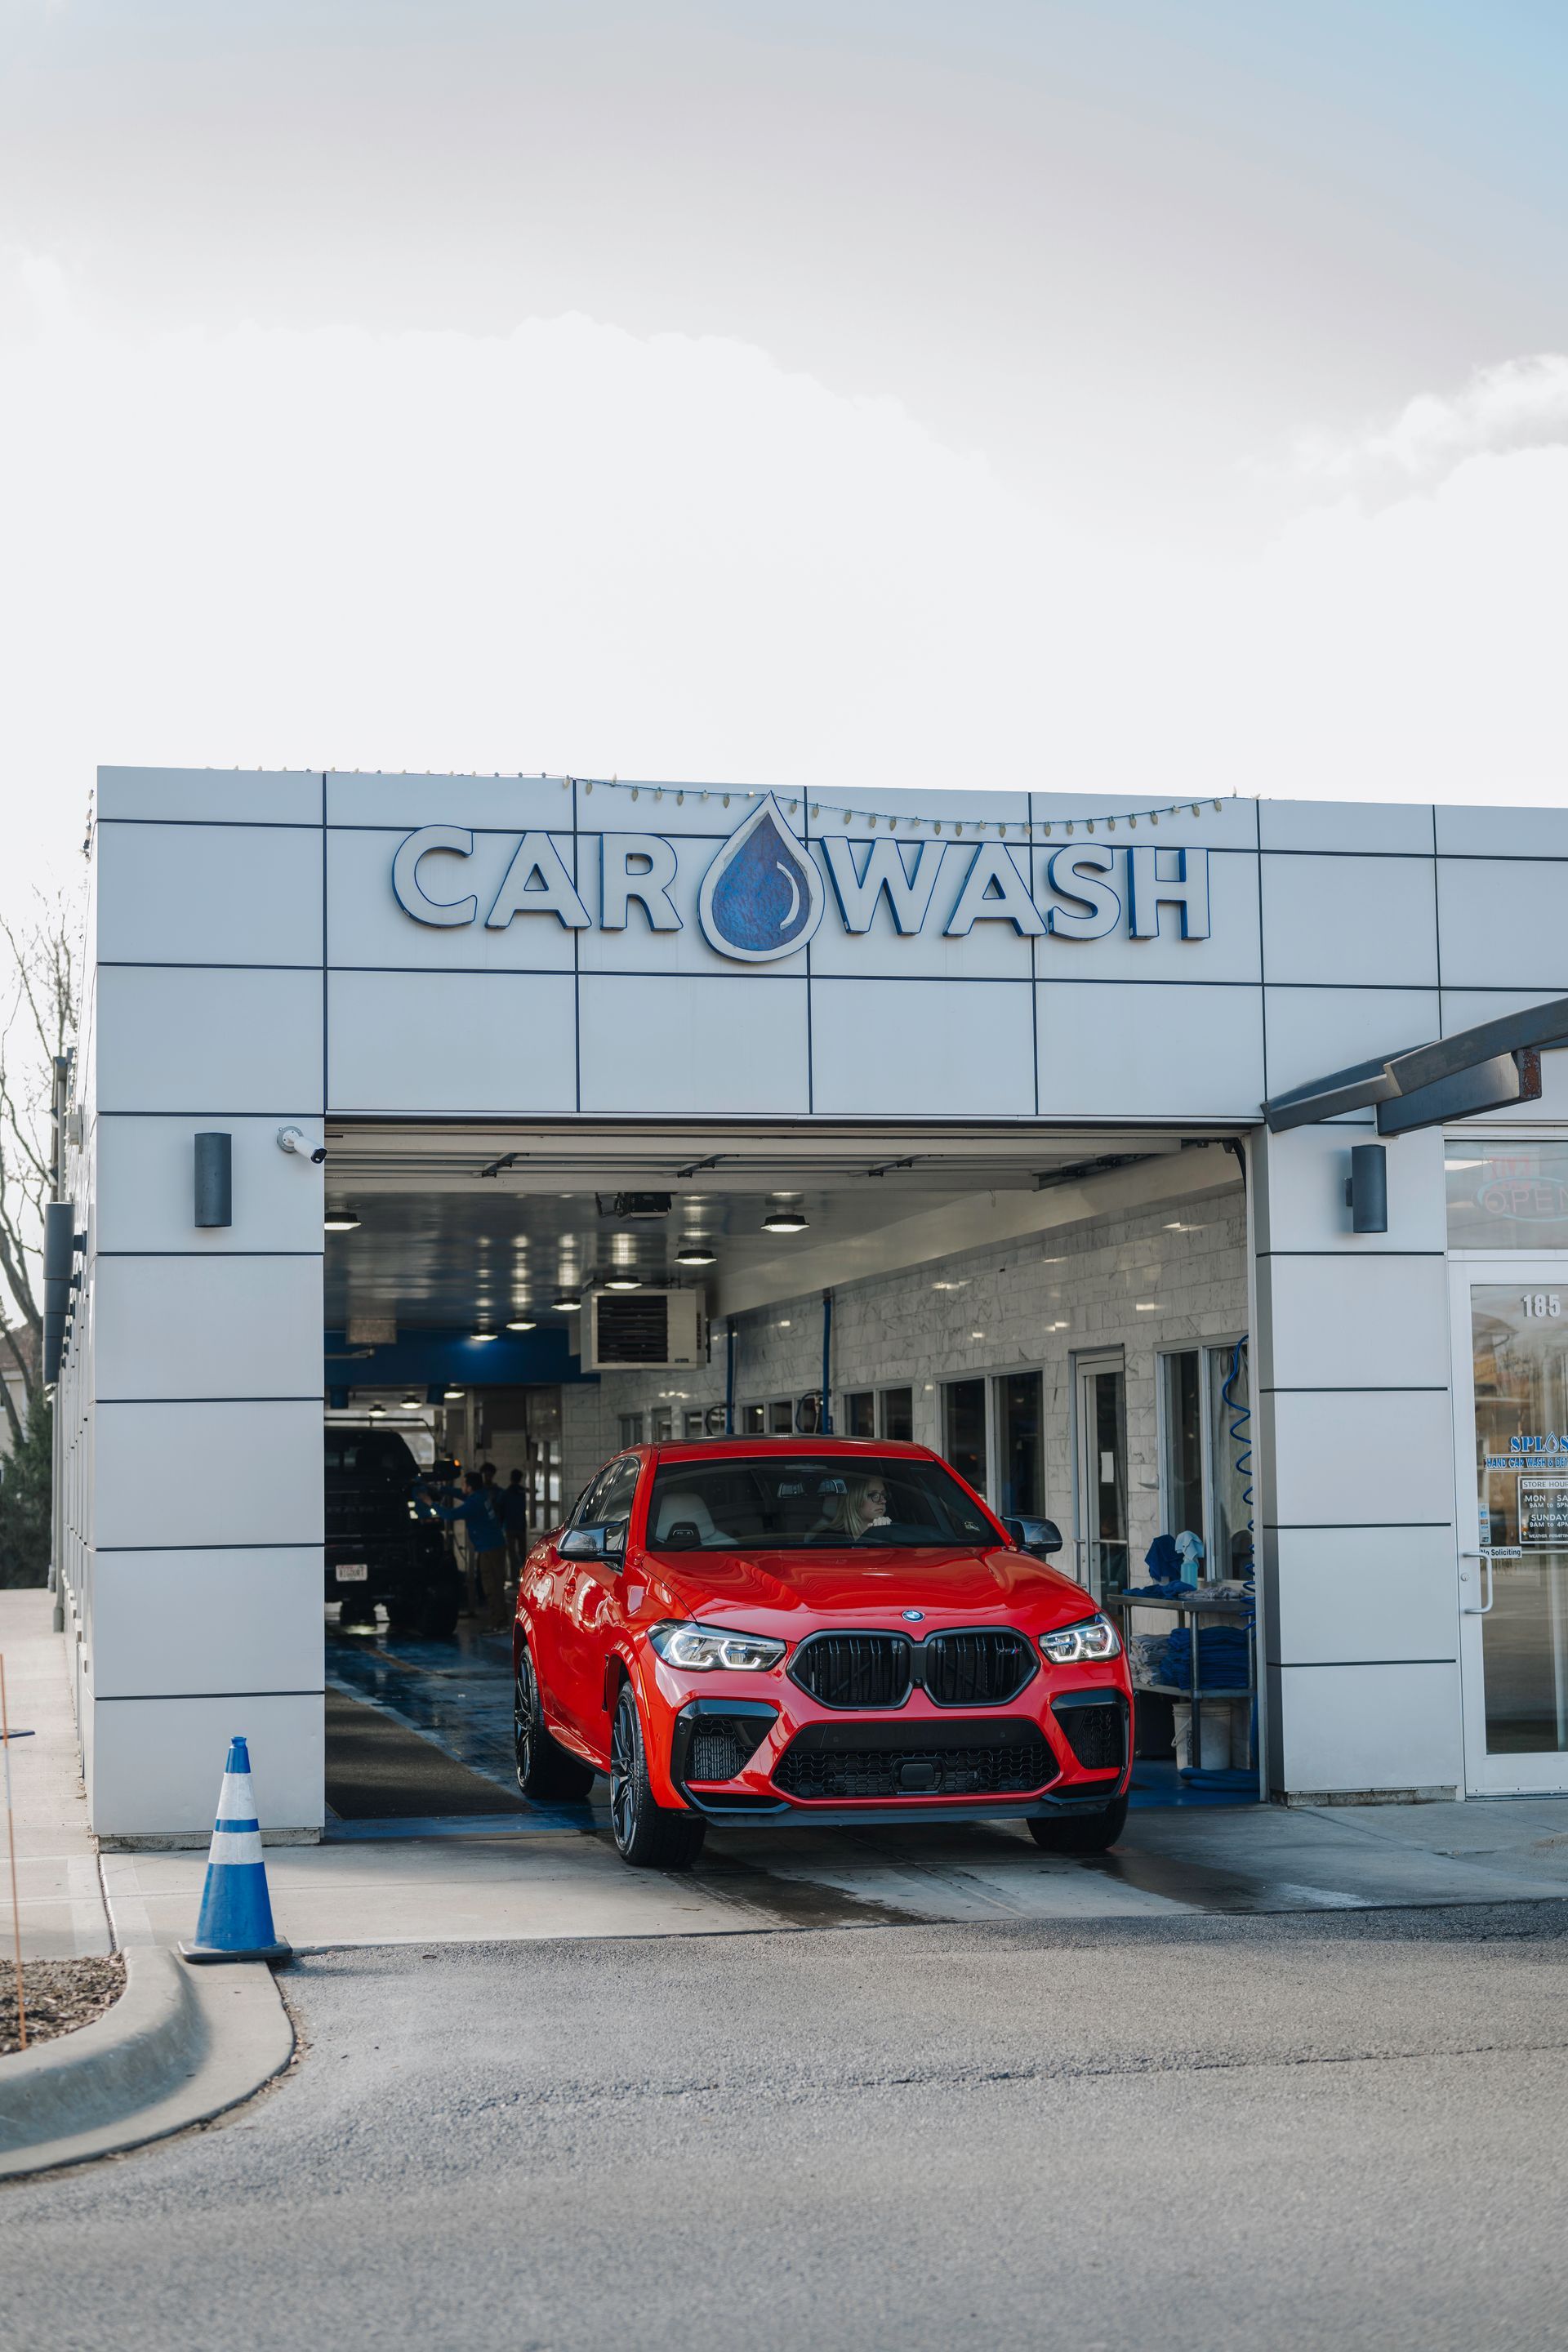 A red car is parked in front of a car wash.